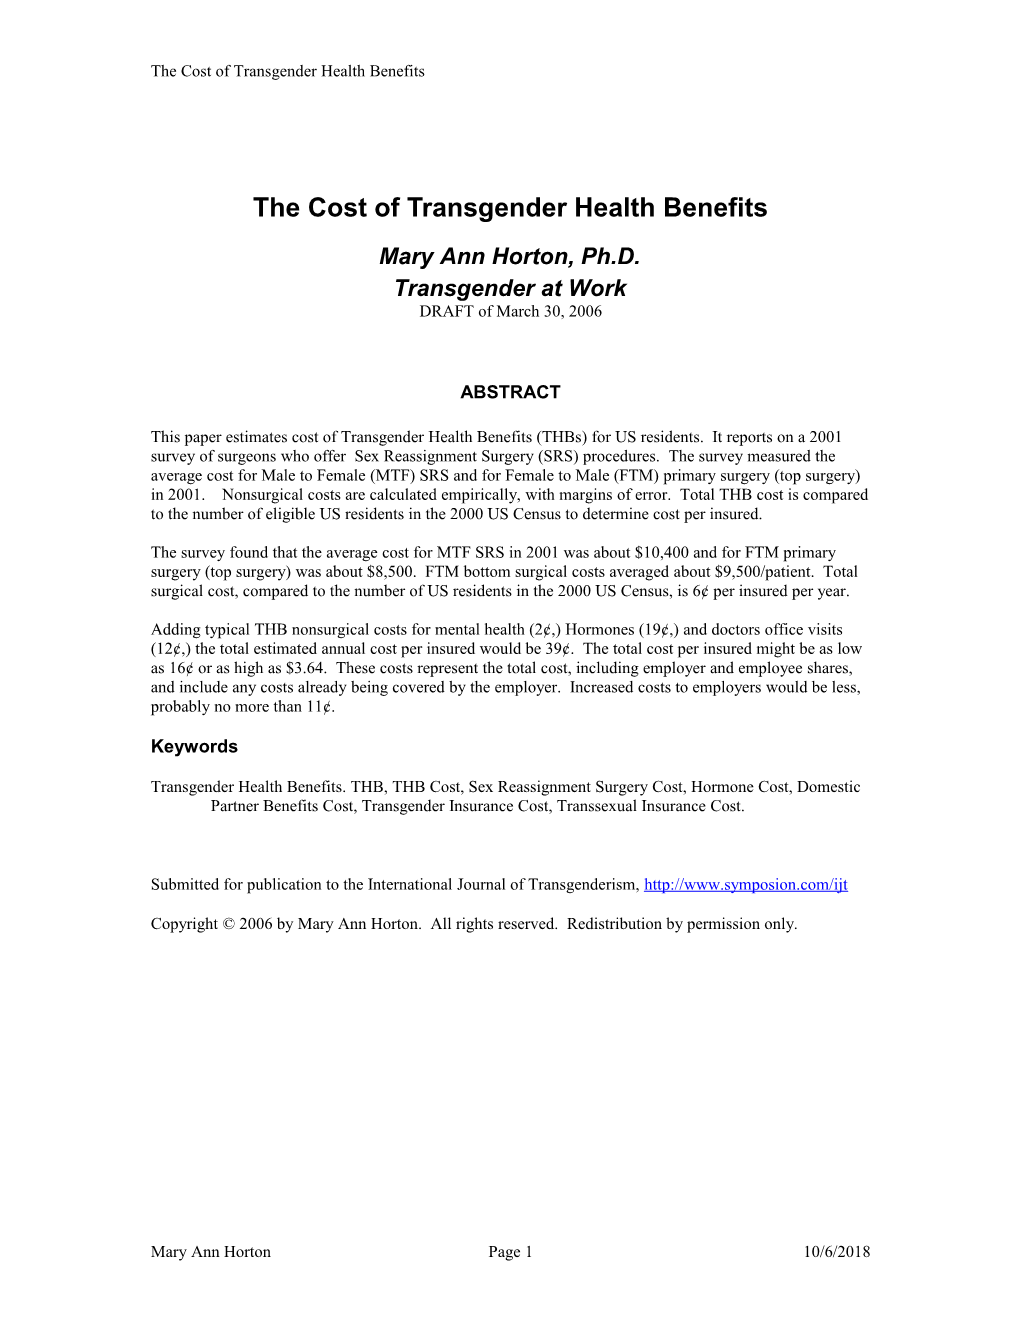 The Cost of Transgender Health Benefits